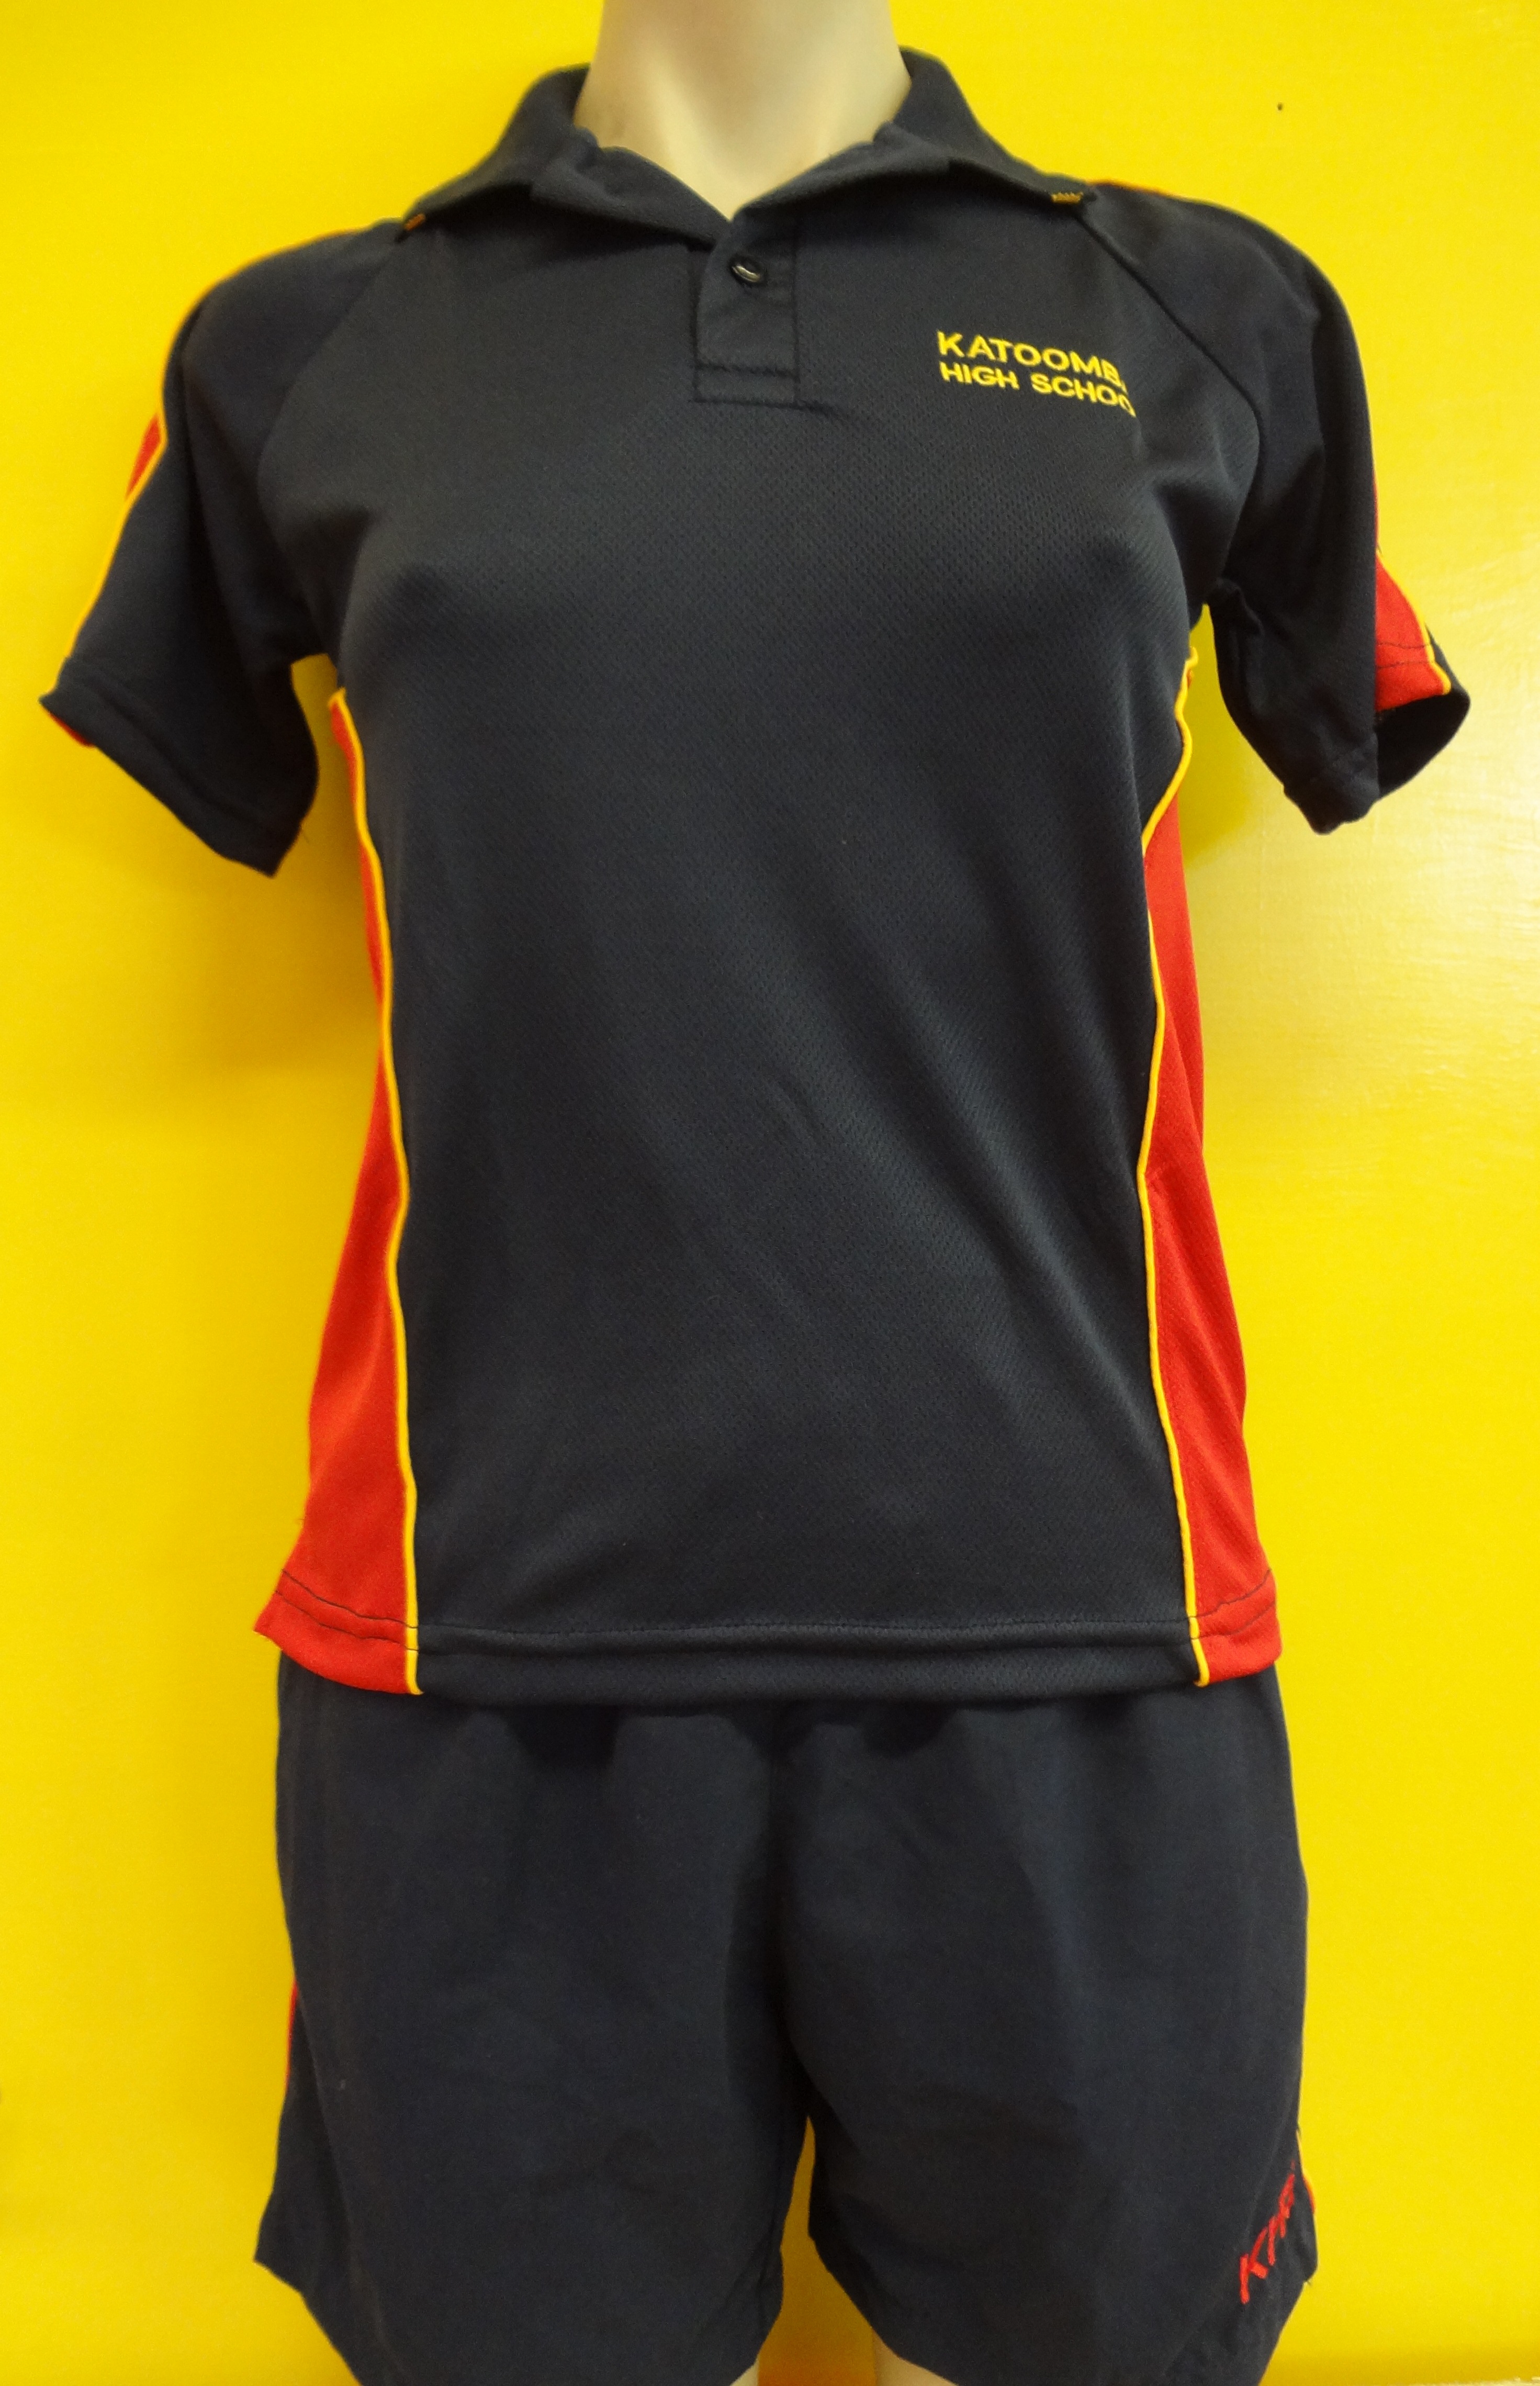 Sport polo shirt and shorts